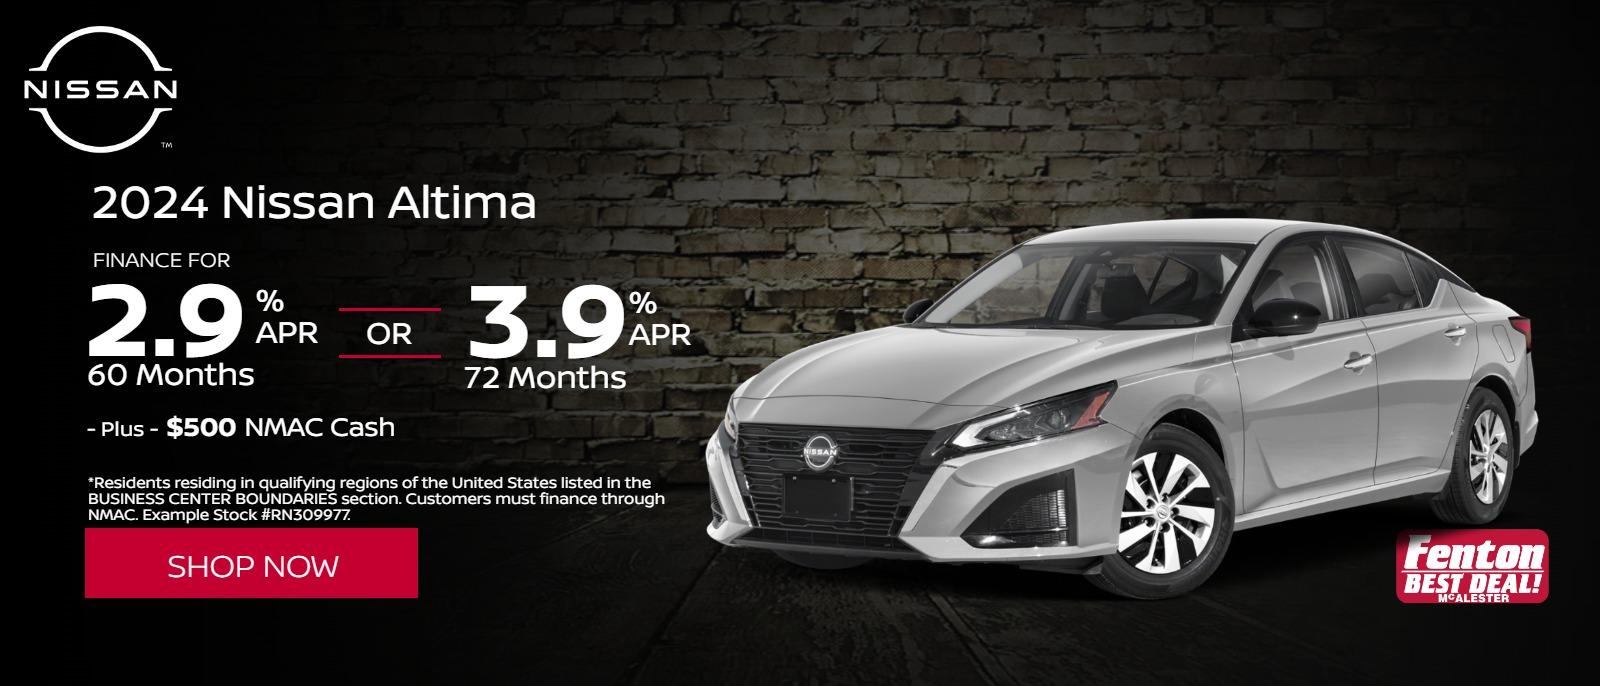 2.9% | or | 3.9% APR Financing available on 2024 Nissan Altima
*Residents residing in qualifying regions of the United States listed in the BUSINESS CENTER BOUNDARIES section. Customers must finance through NMAC